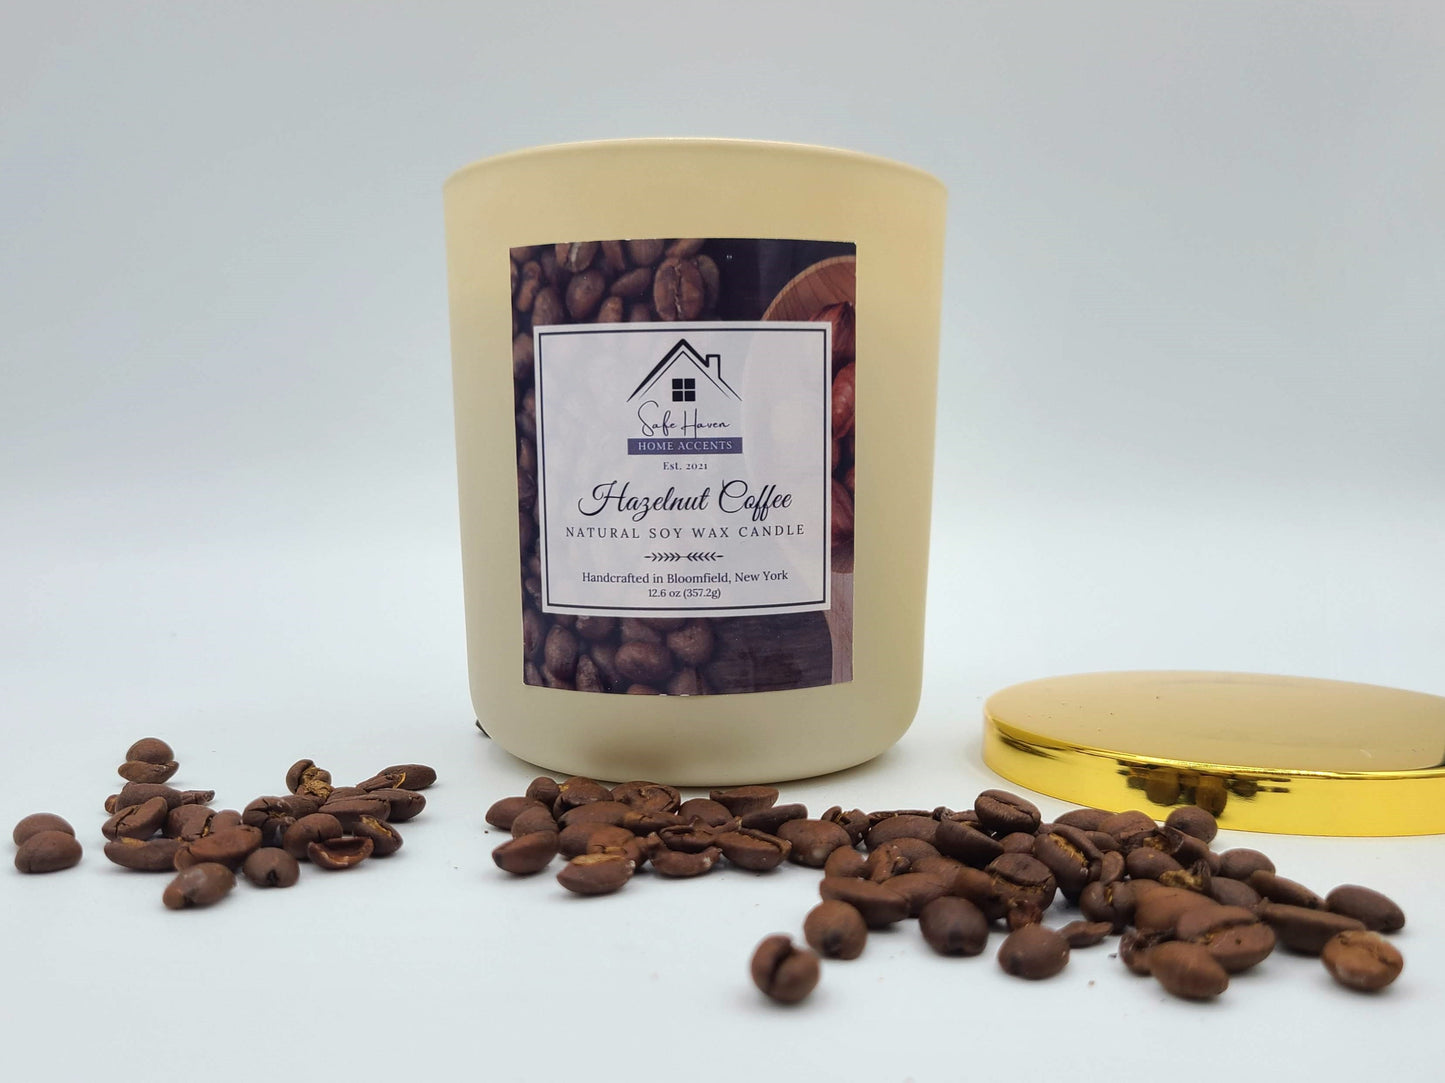 Hazelnut Coffee Natural Soy Wax Candle